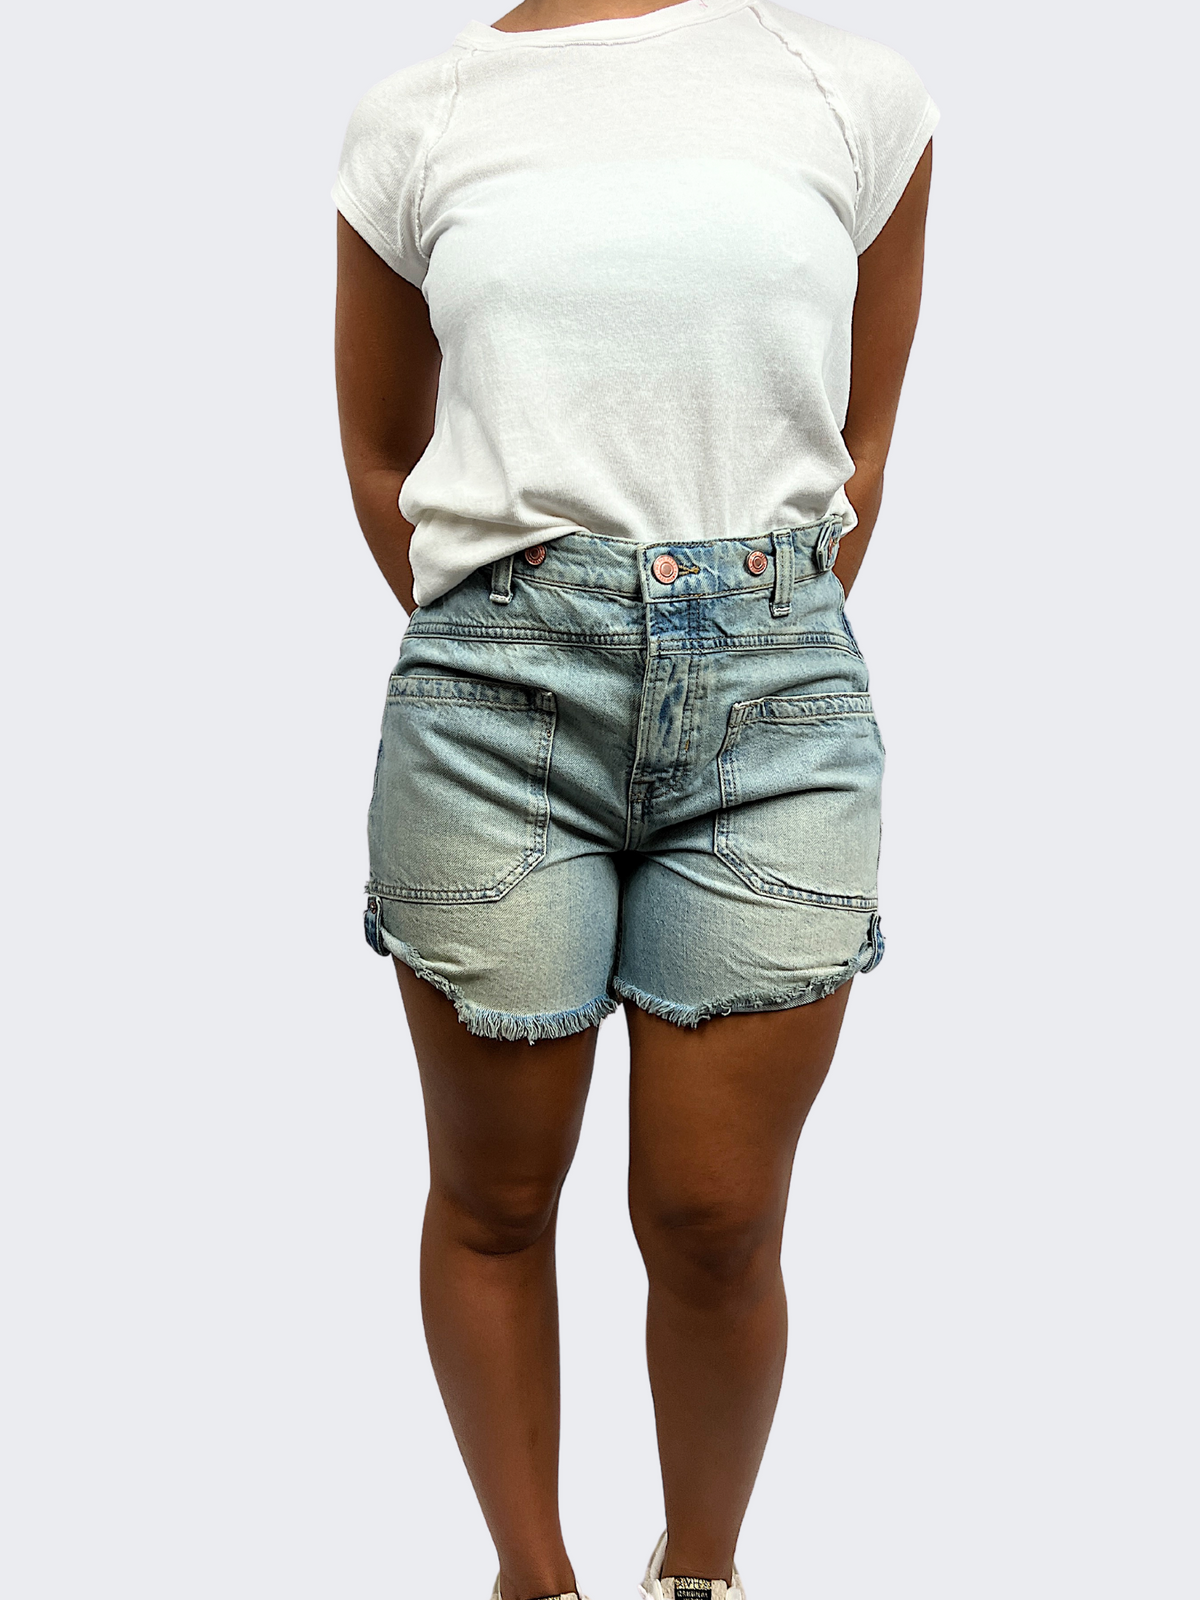 free people palmer short in lalaland-front detail